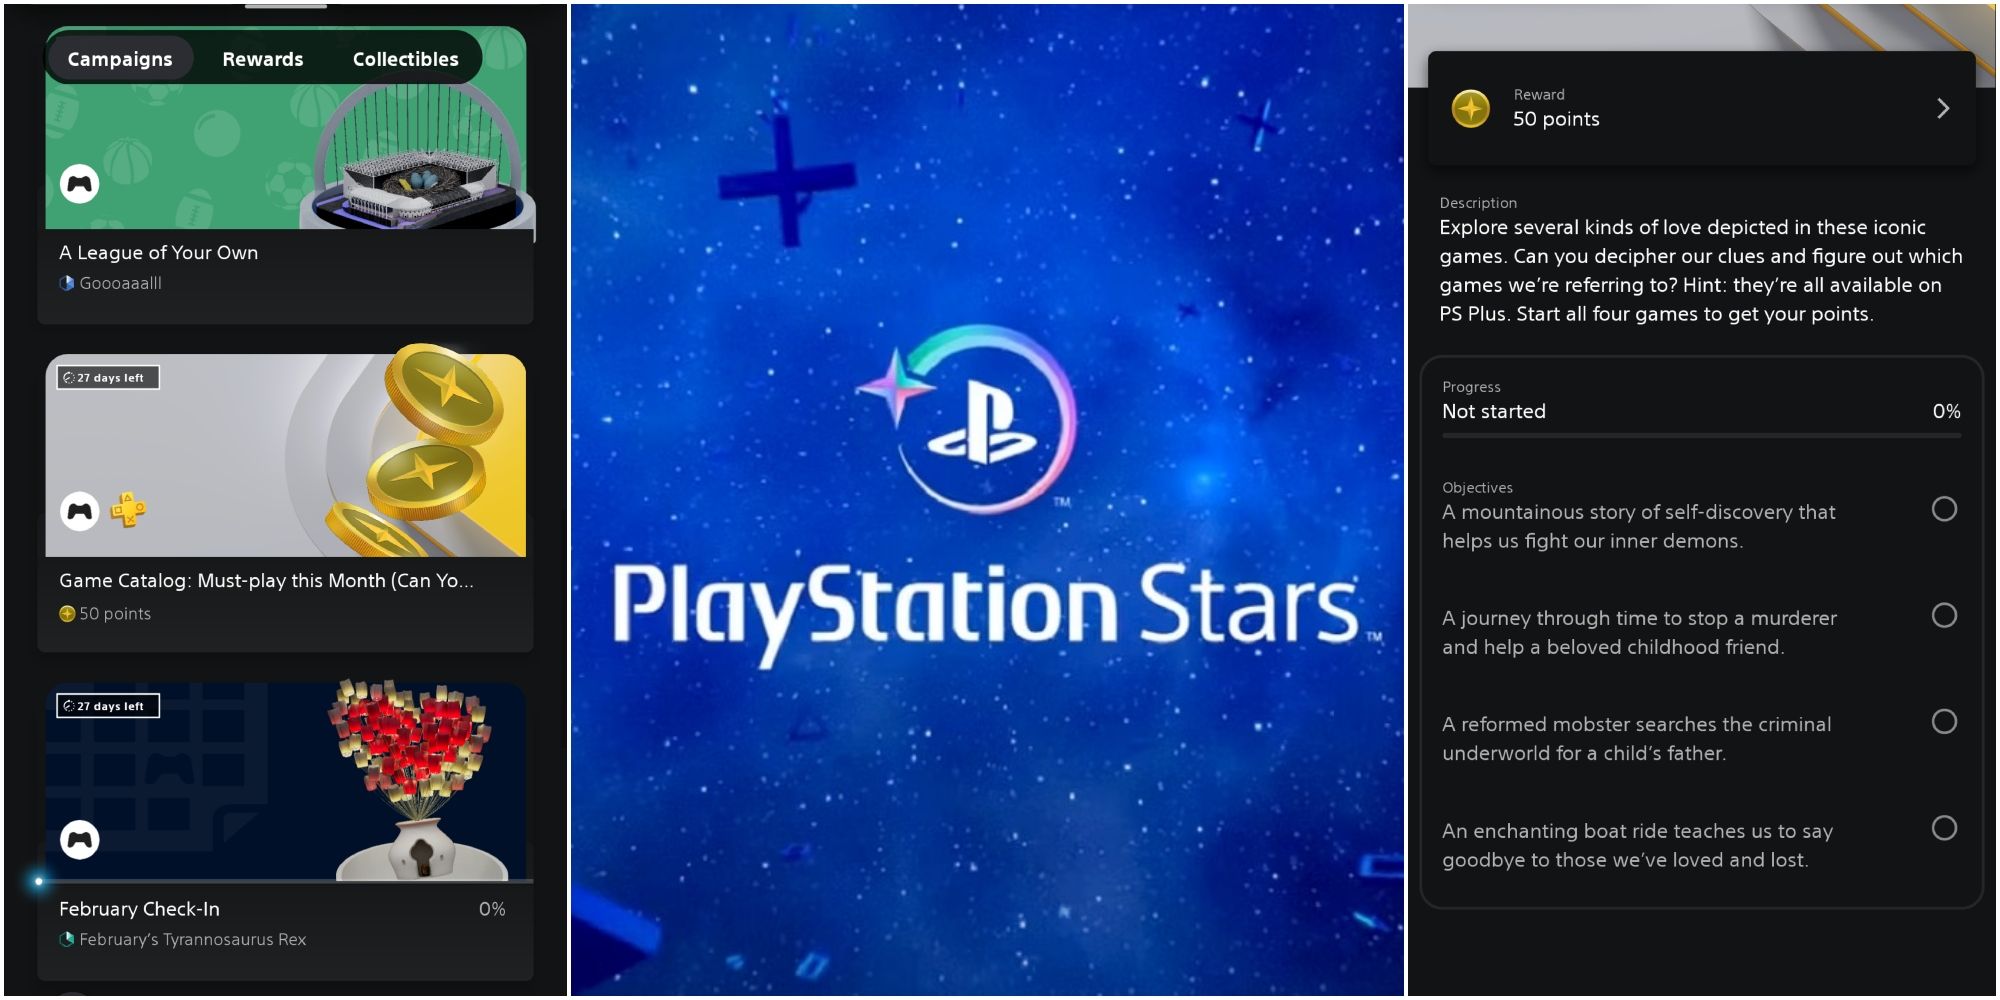 Any idea how to Complete PS Stars Challenge if we already bought game? : r/ playstation